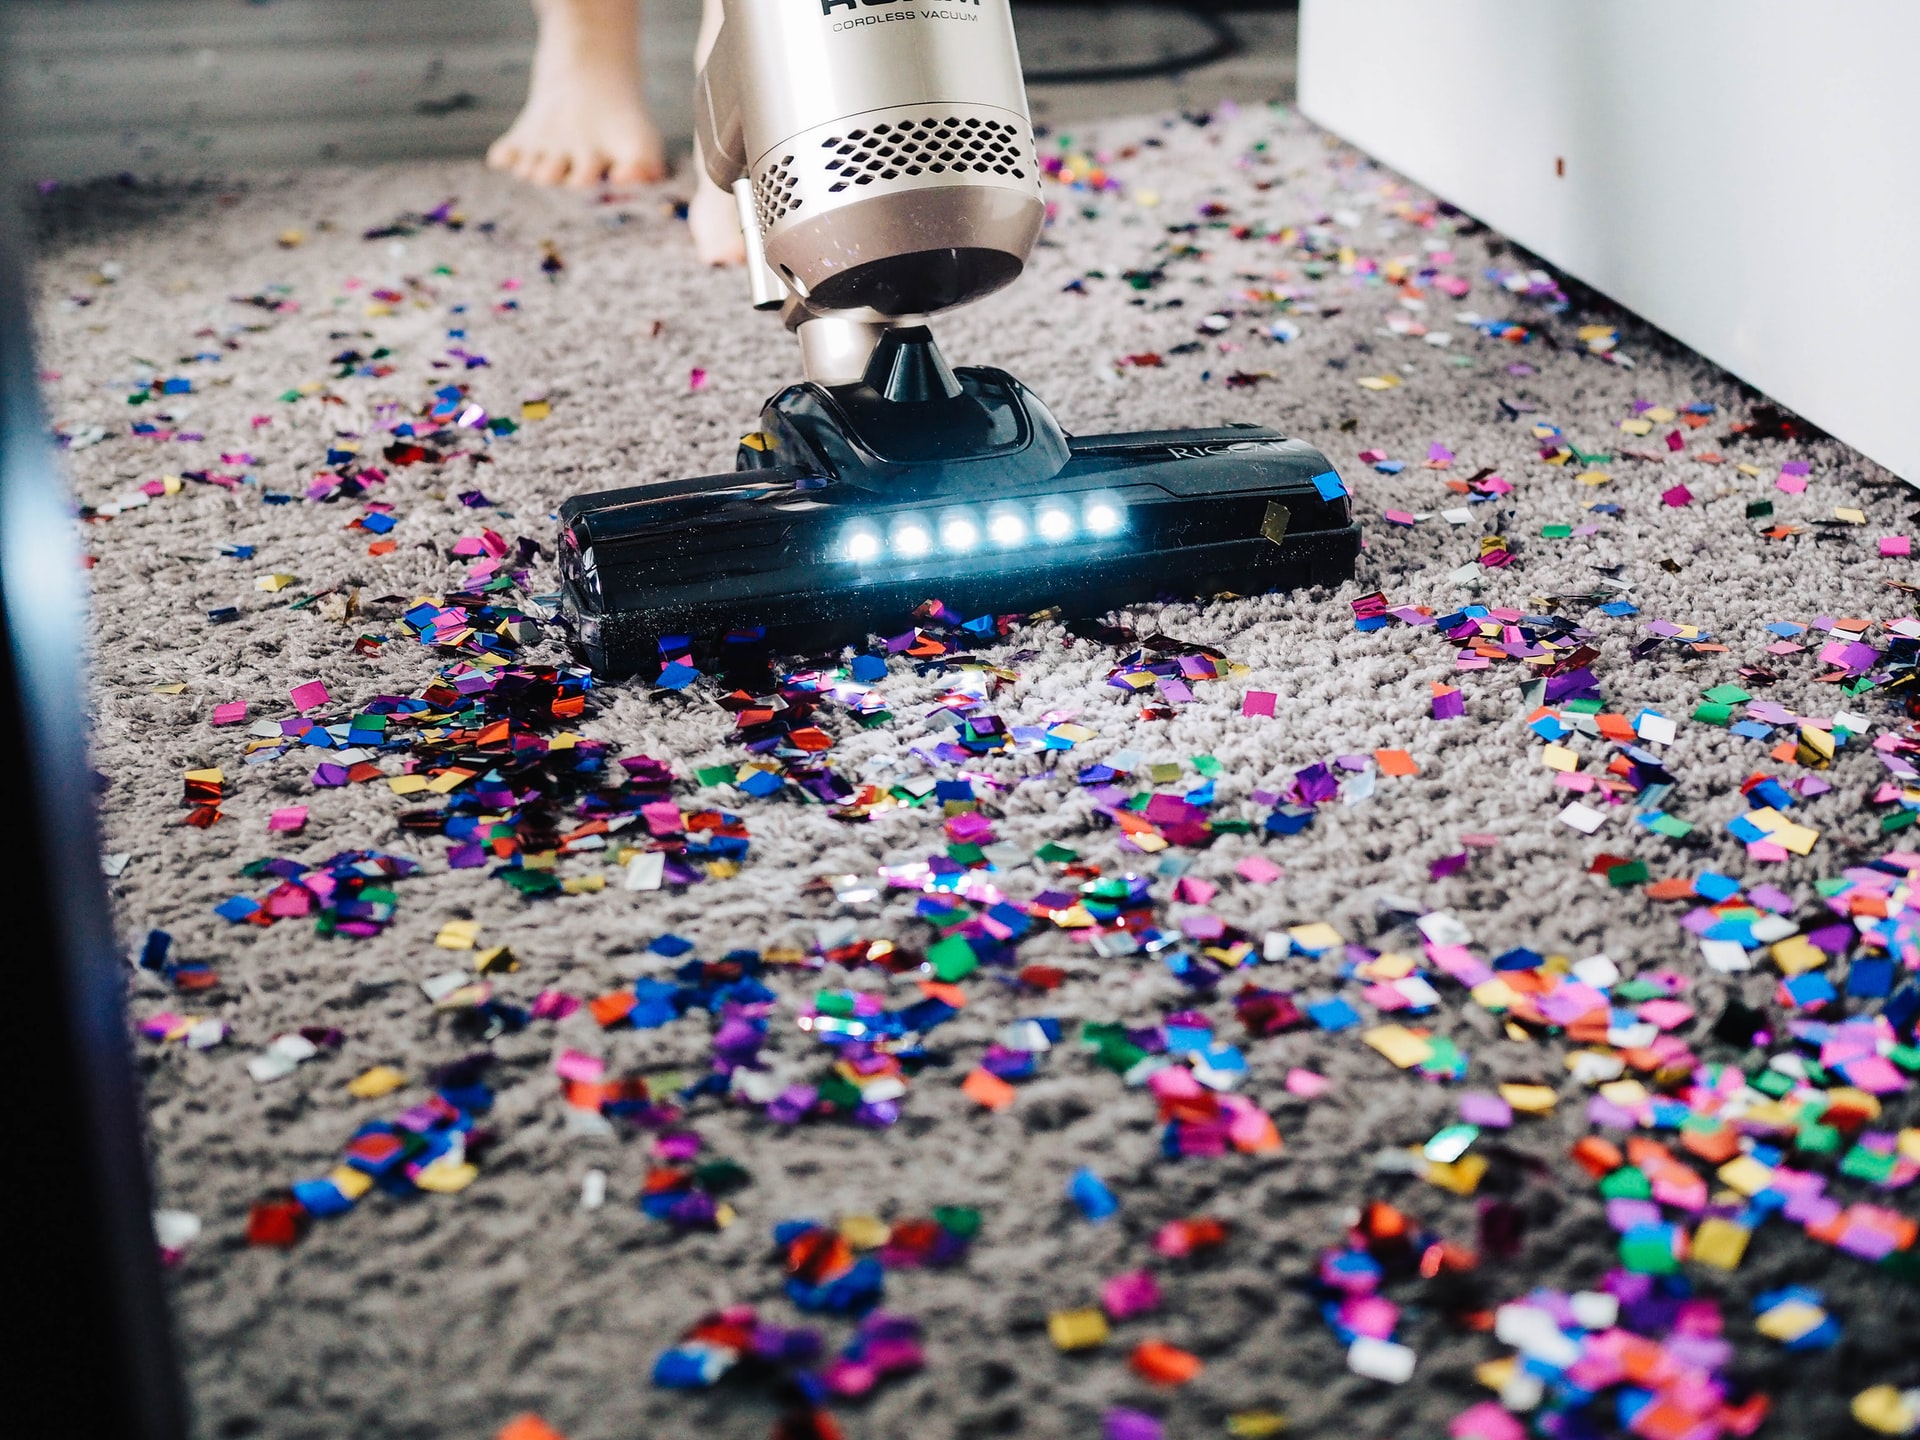 Why We Use the Best Carpet Cleaner for Your Rug